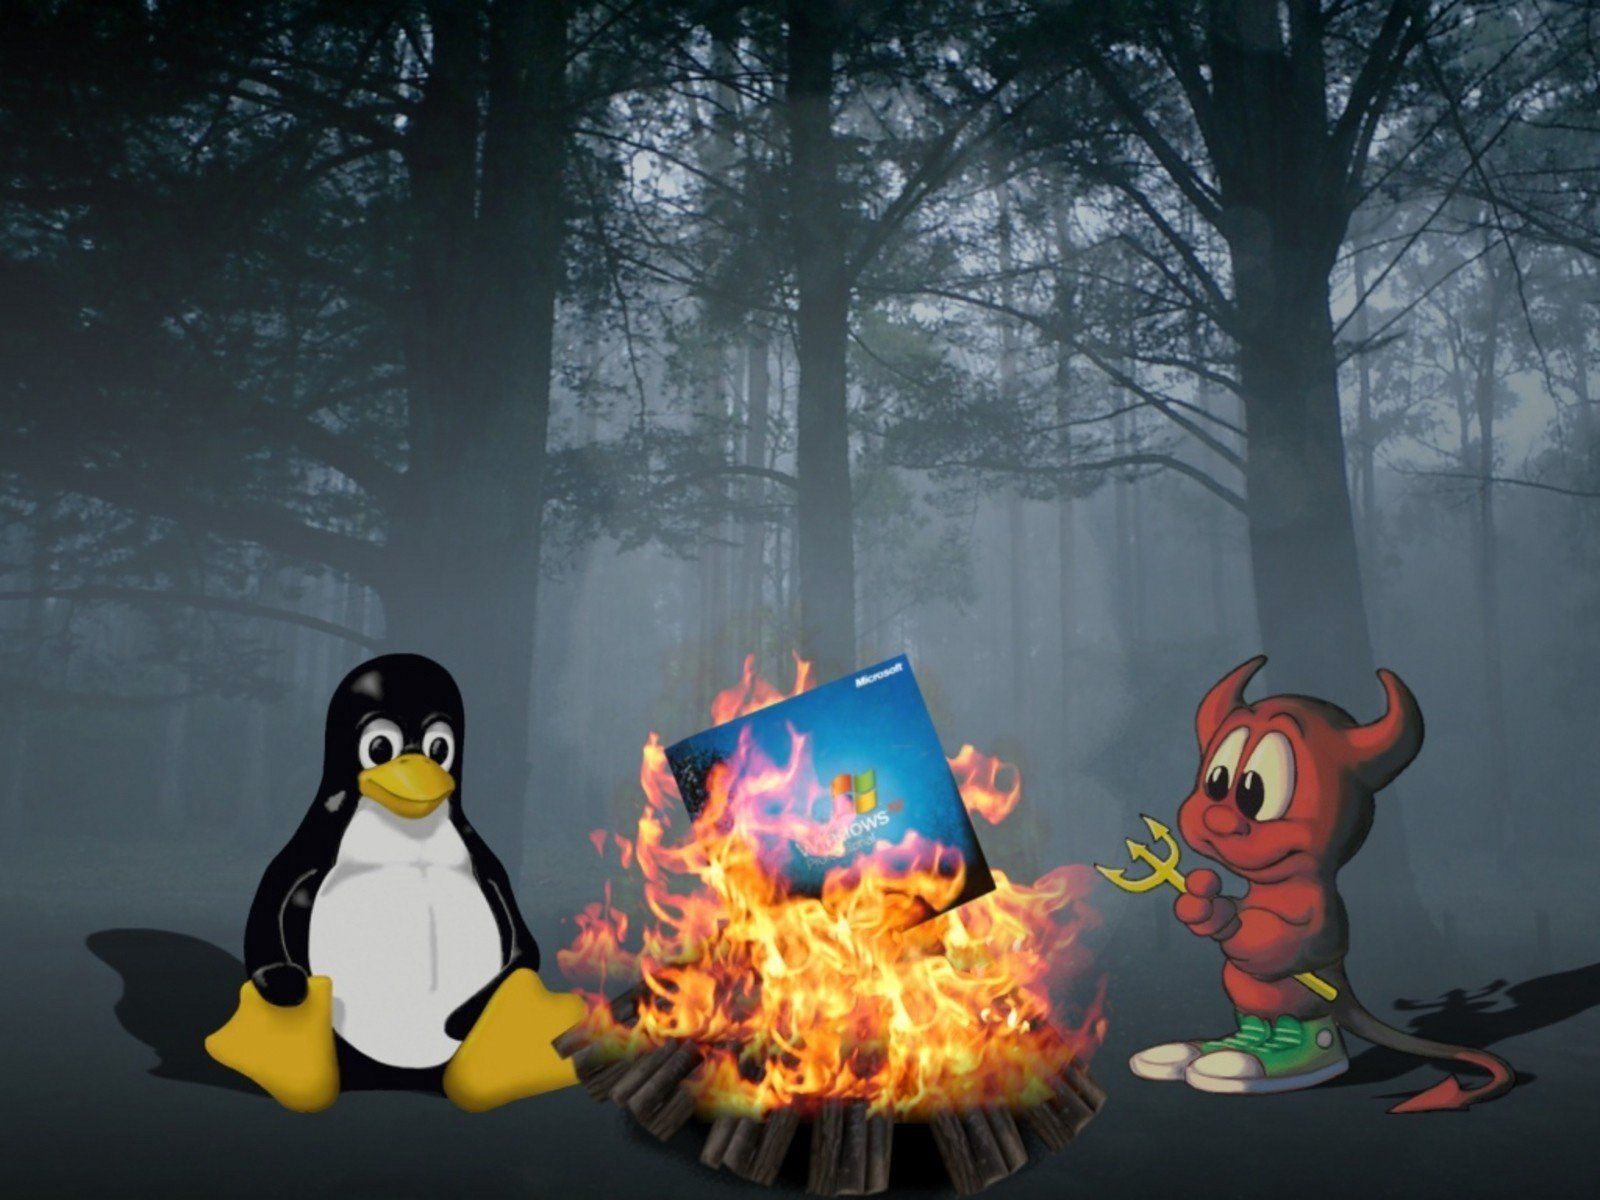 Linux funny Windows XP freebsd camp fire burning wallpaper ...